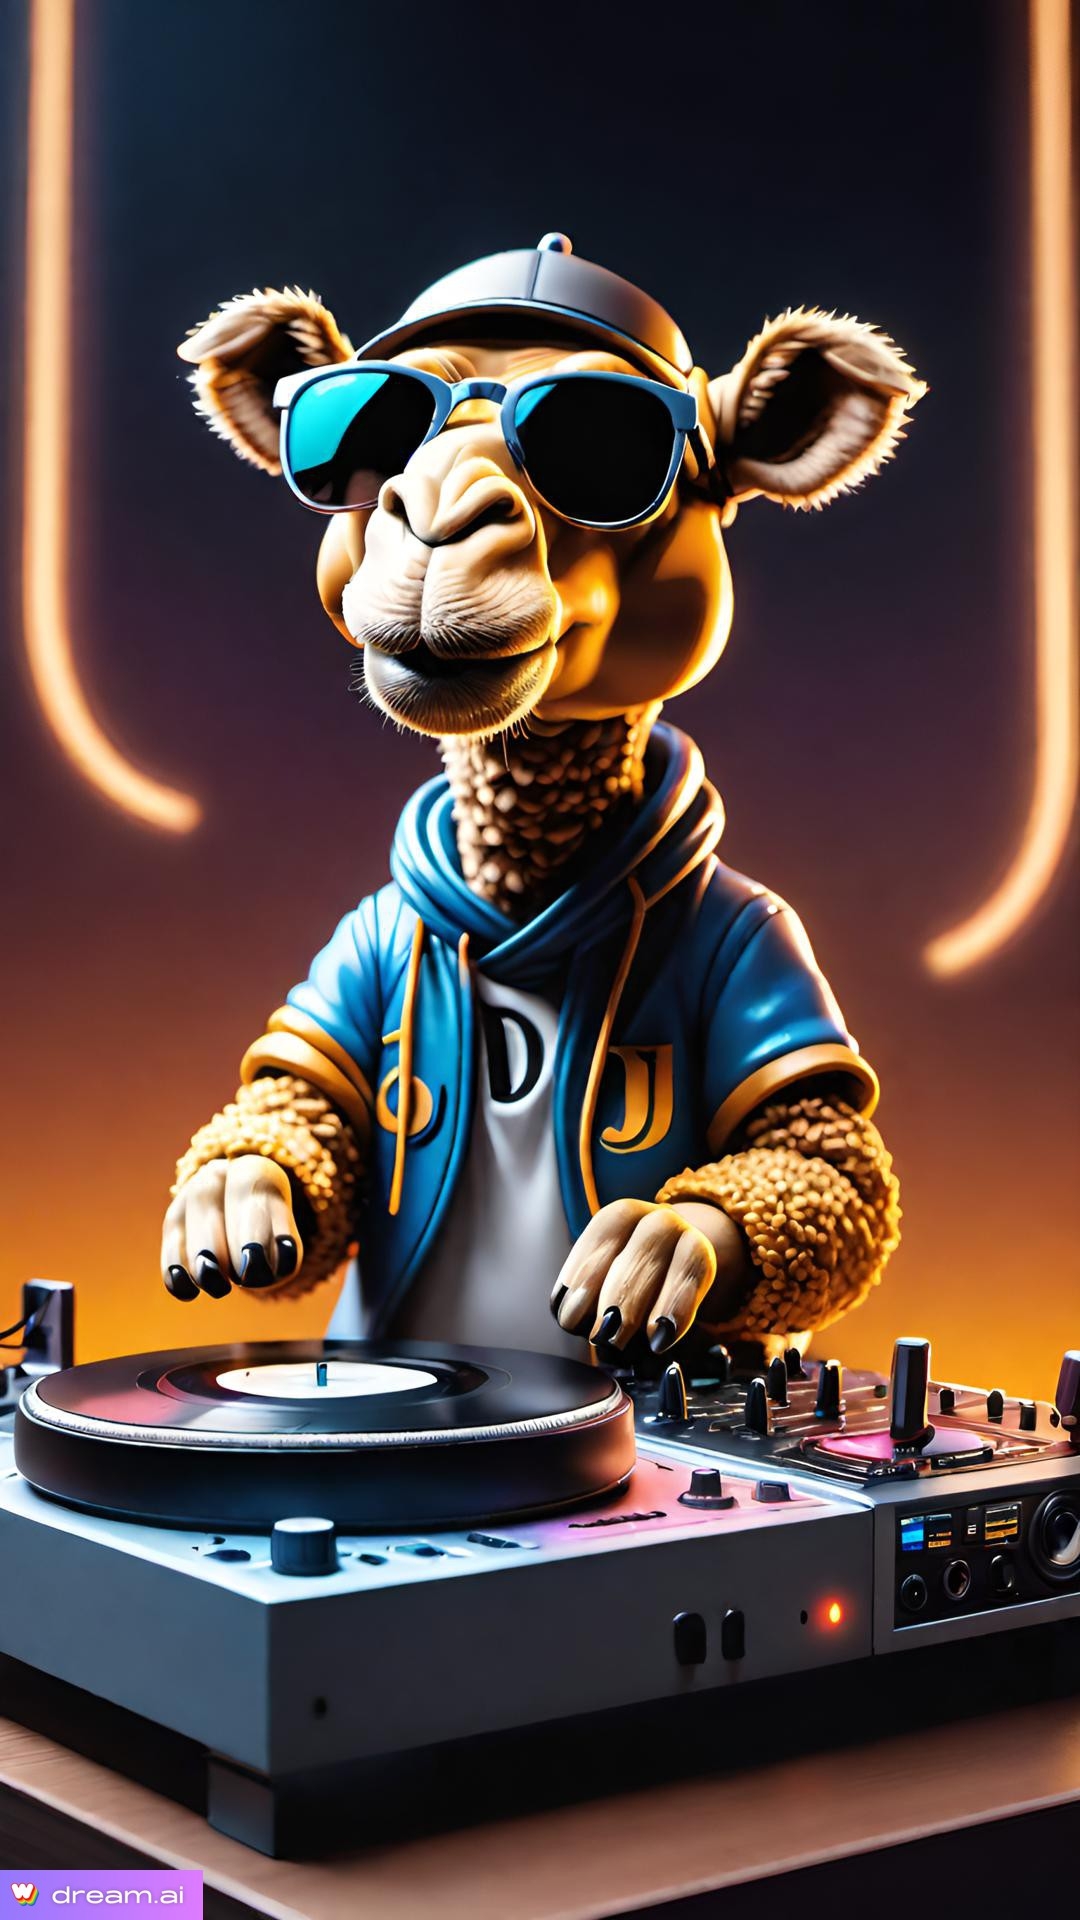 a cartoon camel wearing sunglasses and a hoodie and a dj turntable